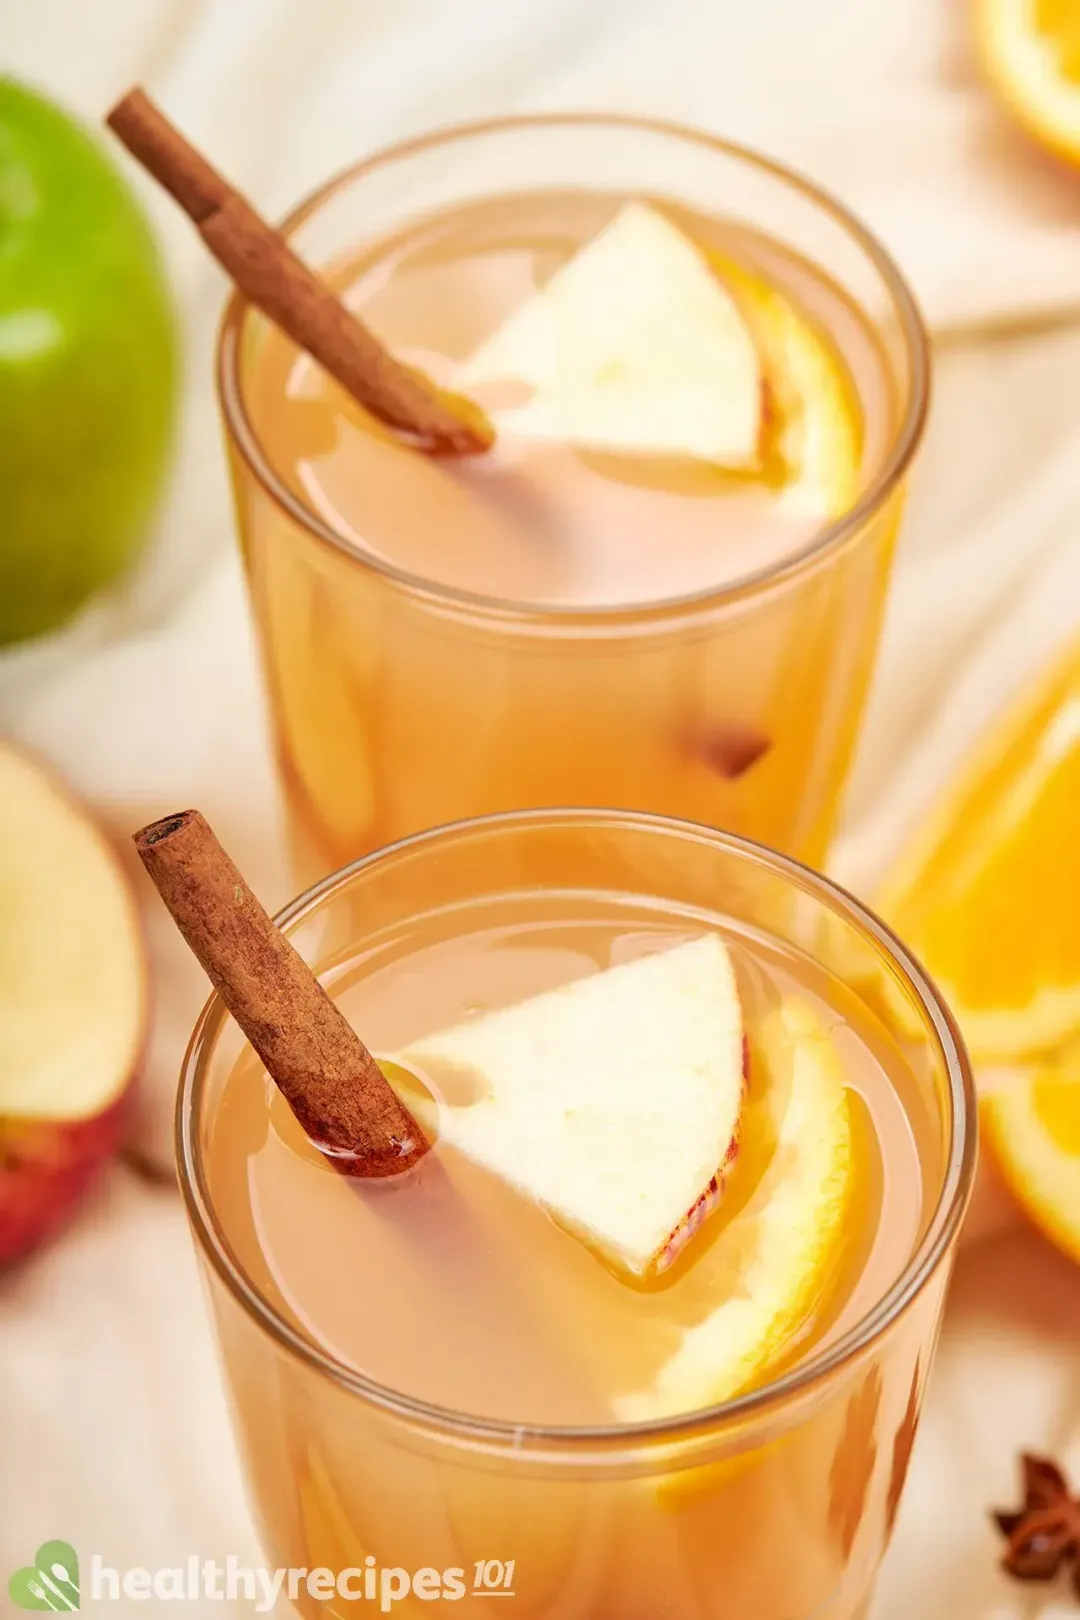 Two glasses of apple cider, topped with apple triangles and cinnamon sticks